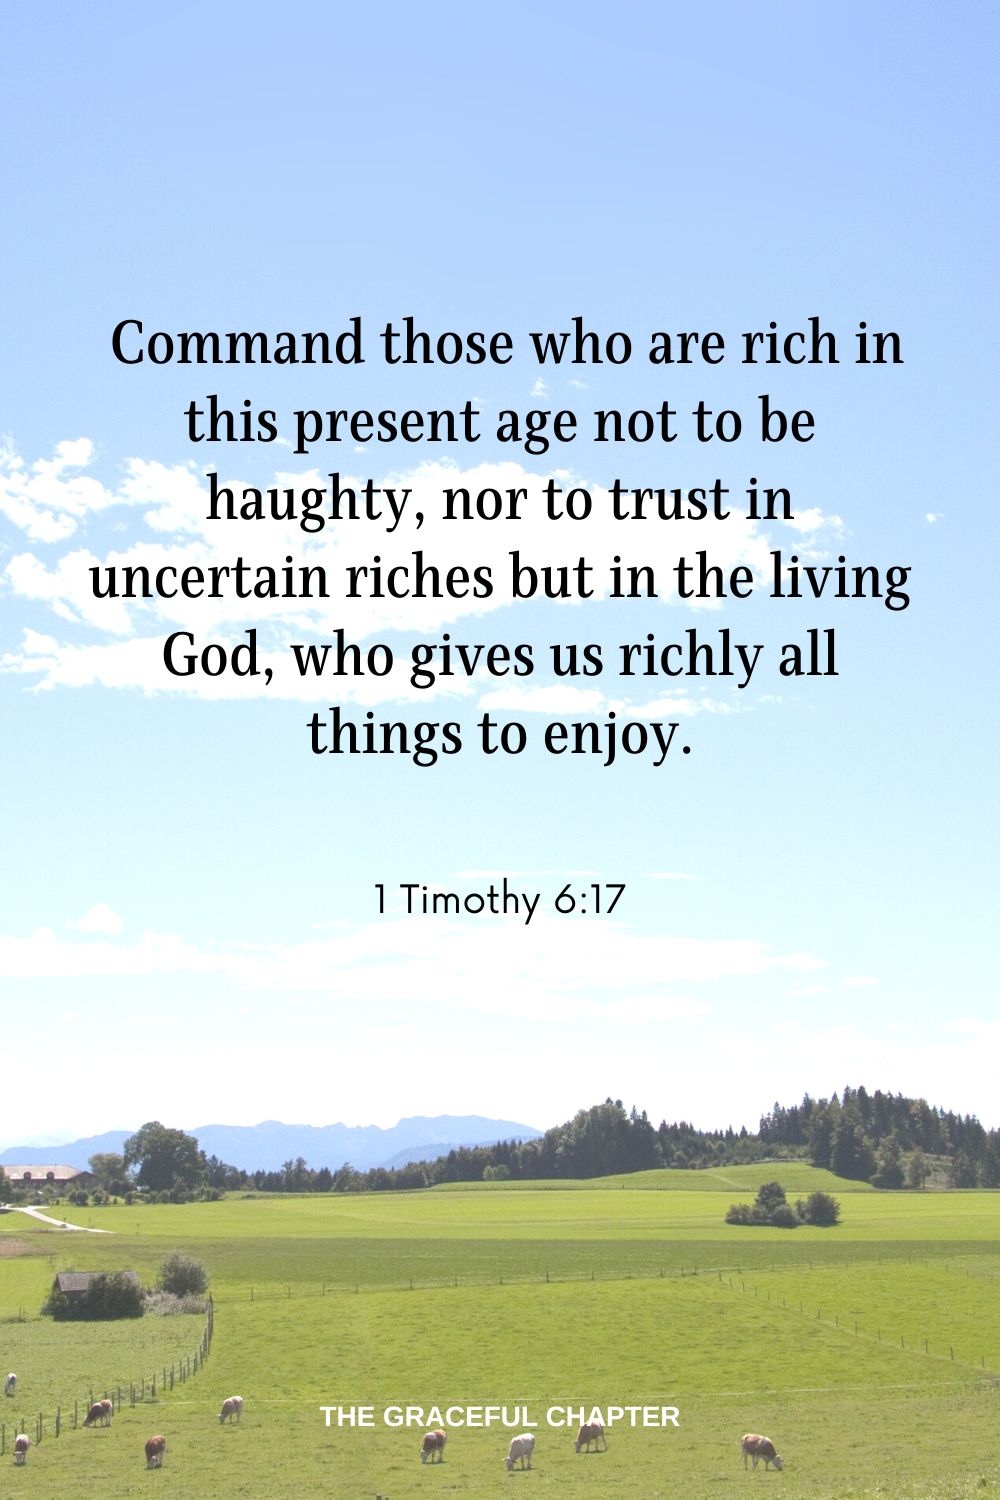  Command those who are rich in this present age not to be haughty, nor to trust in uncertain riches but in the living God, who gives us richly all things to enjoy. 1 Timothy 6:17